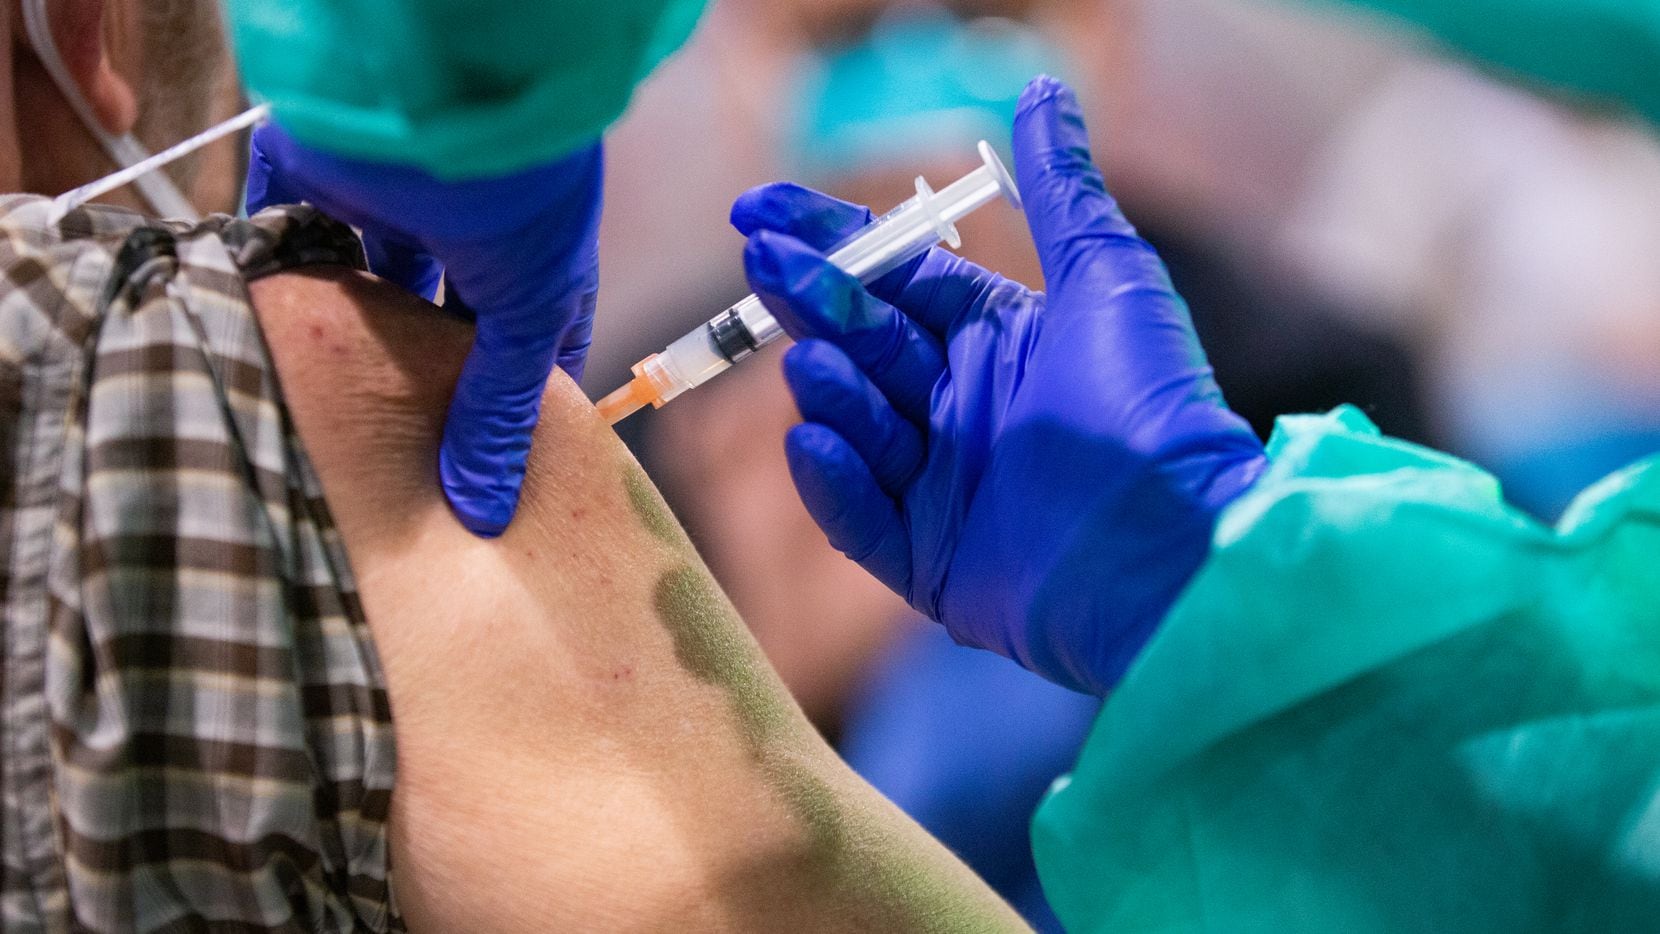 A man is injected with the COVID-19 vaccine at Fair Park in Dallas on Wednesday, Feb. 2, 2021.